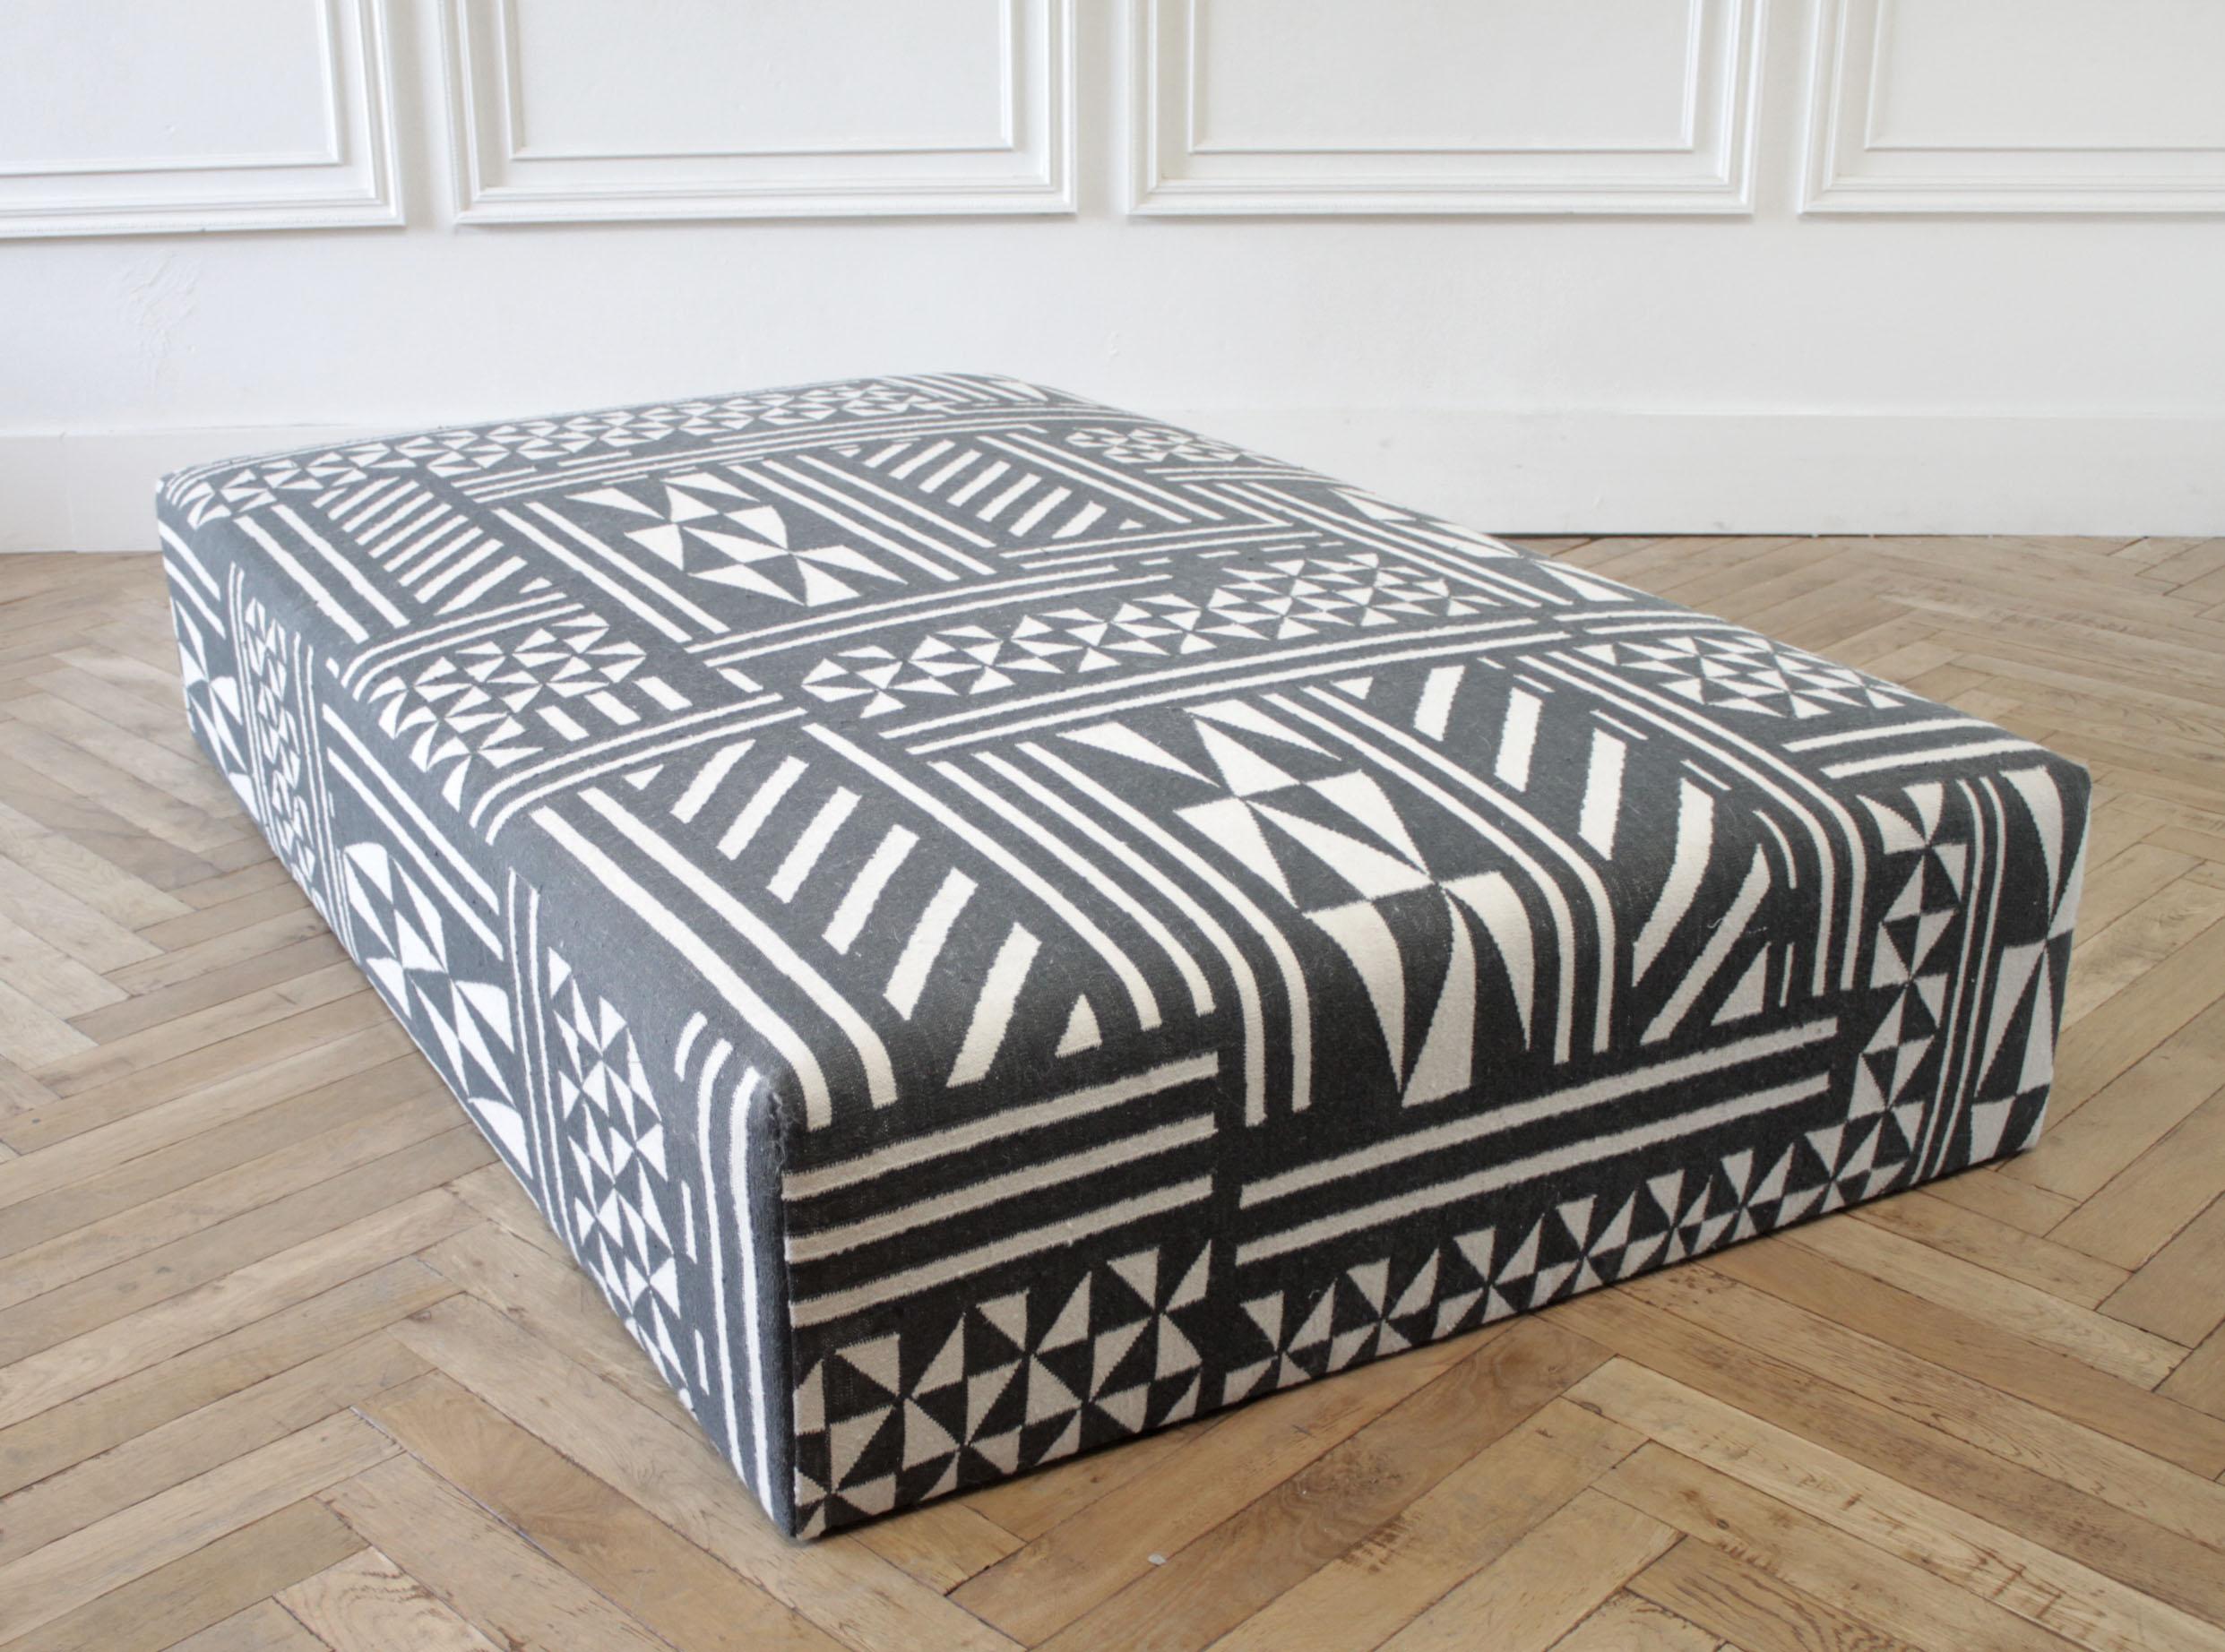 Vintage wool rug cube style ottoman in black and off-white
Custom design rug ottoman 
Size: 72